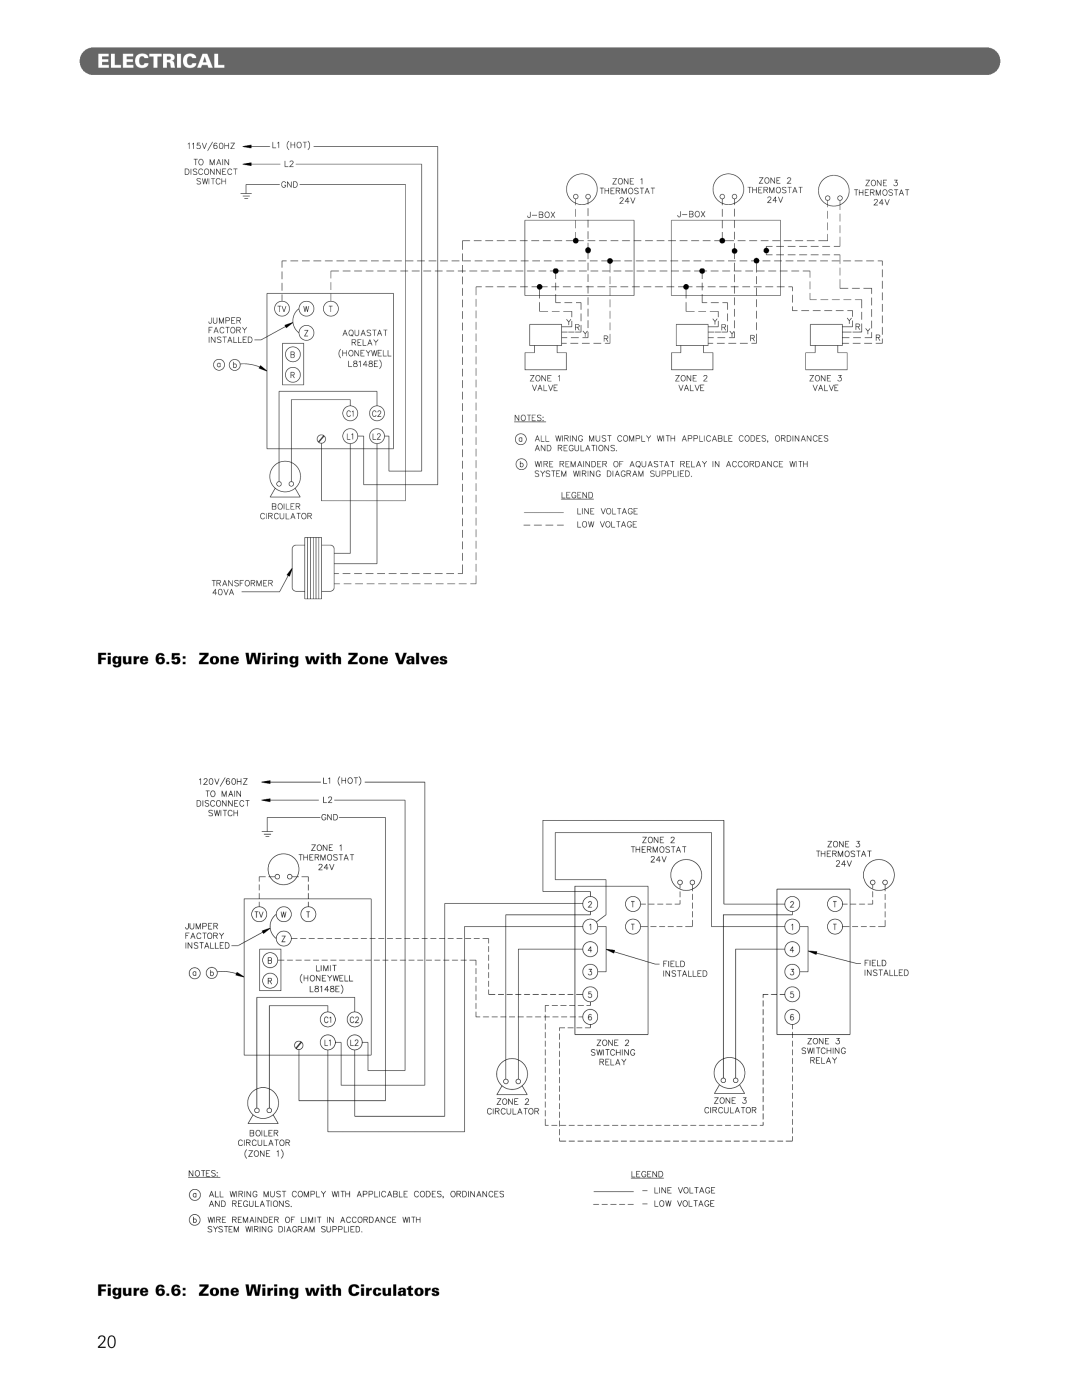 PB Heat MI/MIH series manual Electrical, 5 Zone Wiring with Zone Valves, 6 Zone Wiring with Circulators 